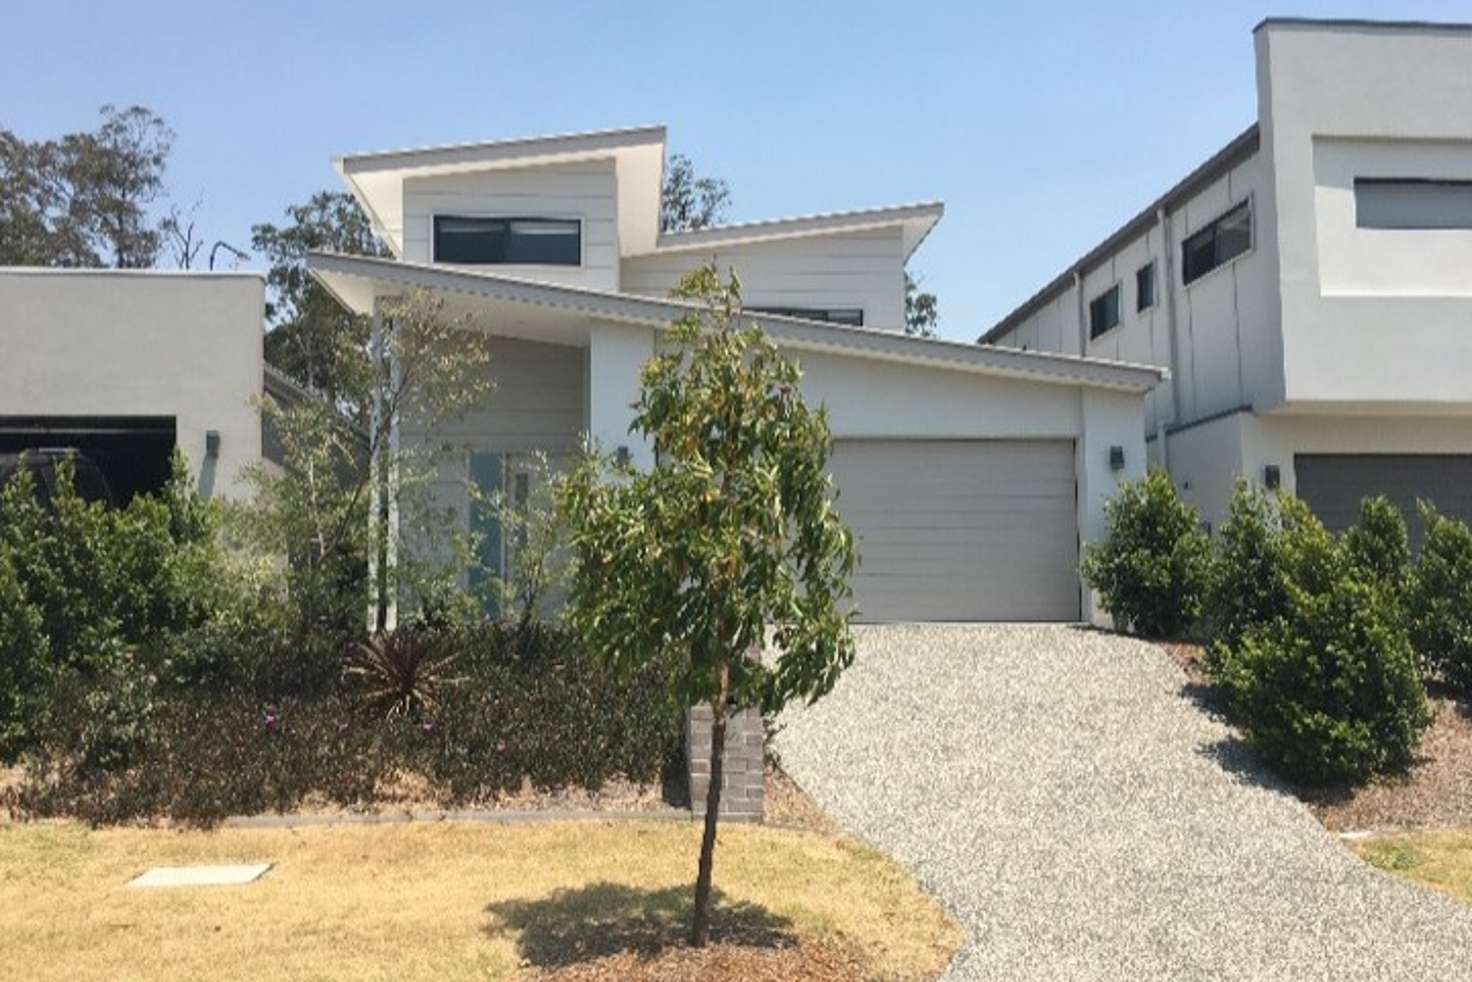 Main view of Homely house listing, 25 Rivina, Coomera QLD 4209